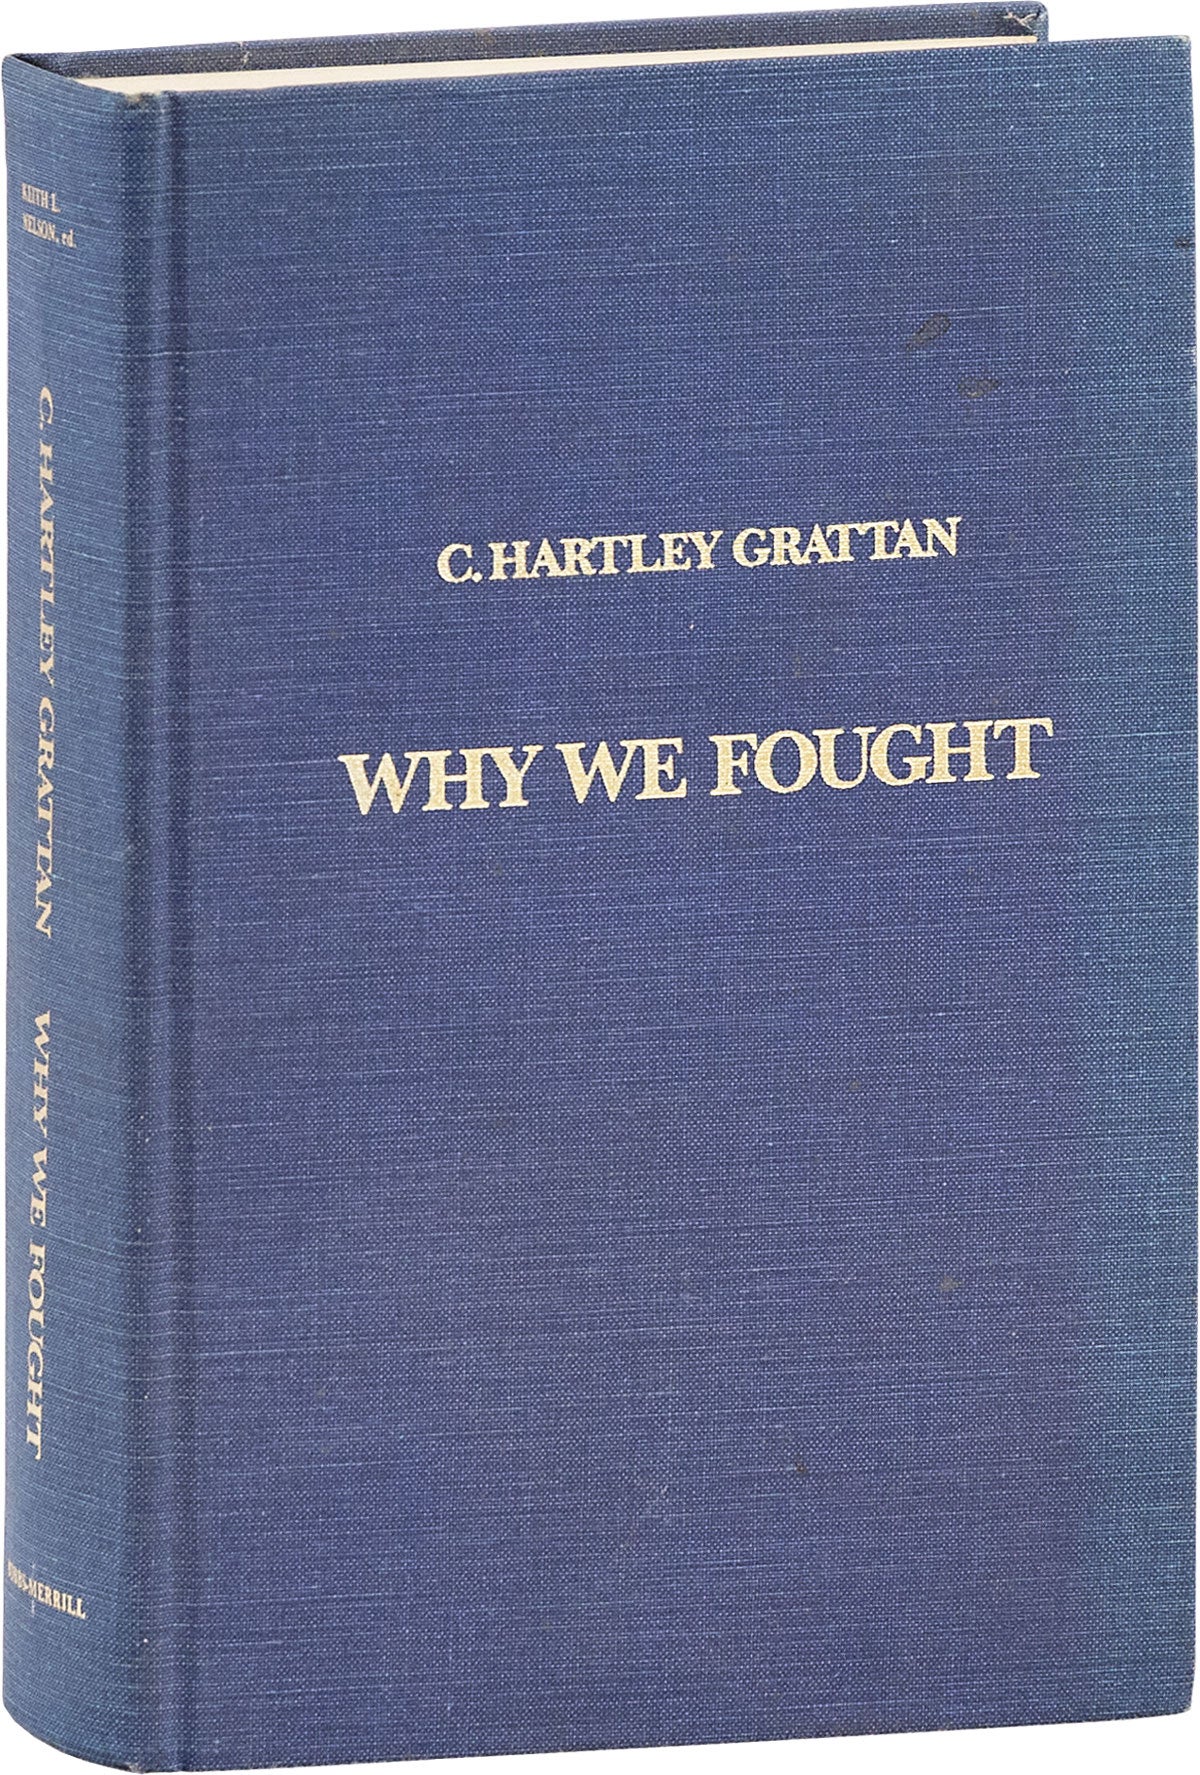 [Item #80746] Why We Fought. C. HARTLEY GRATTAN.